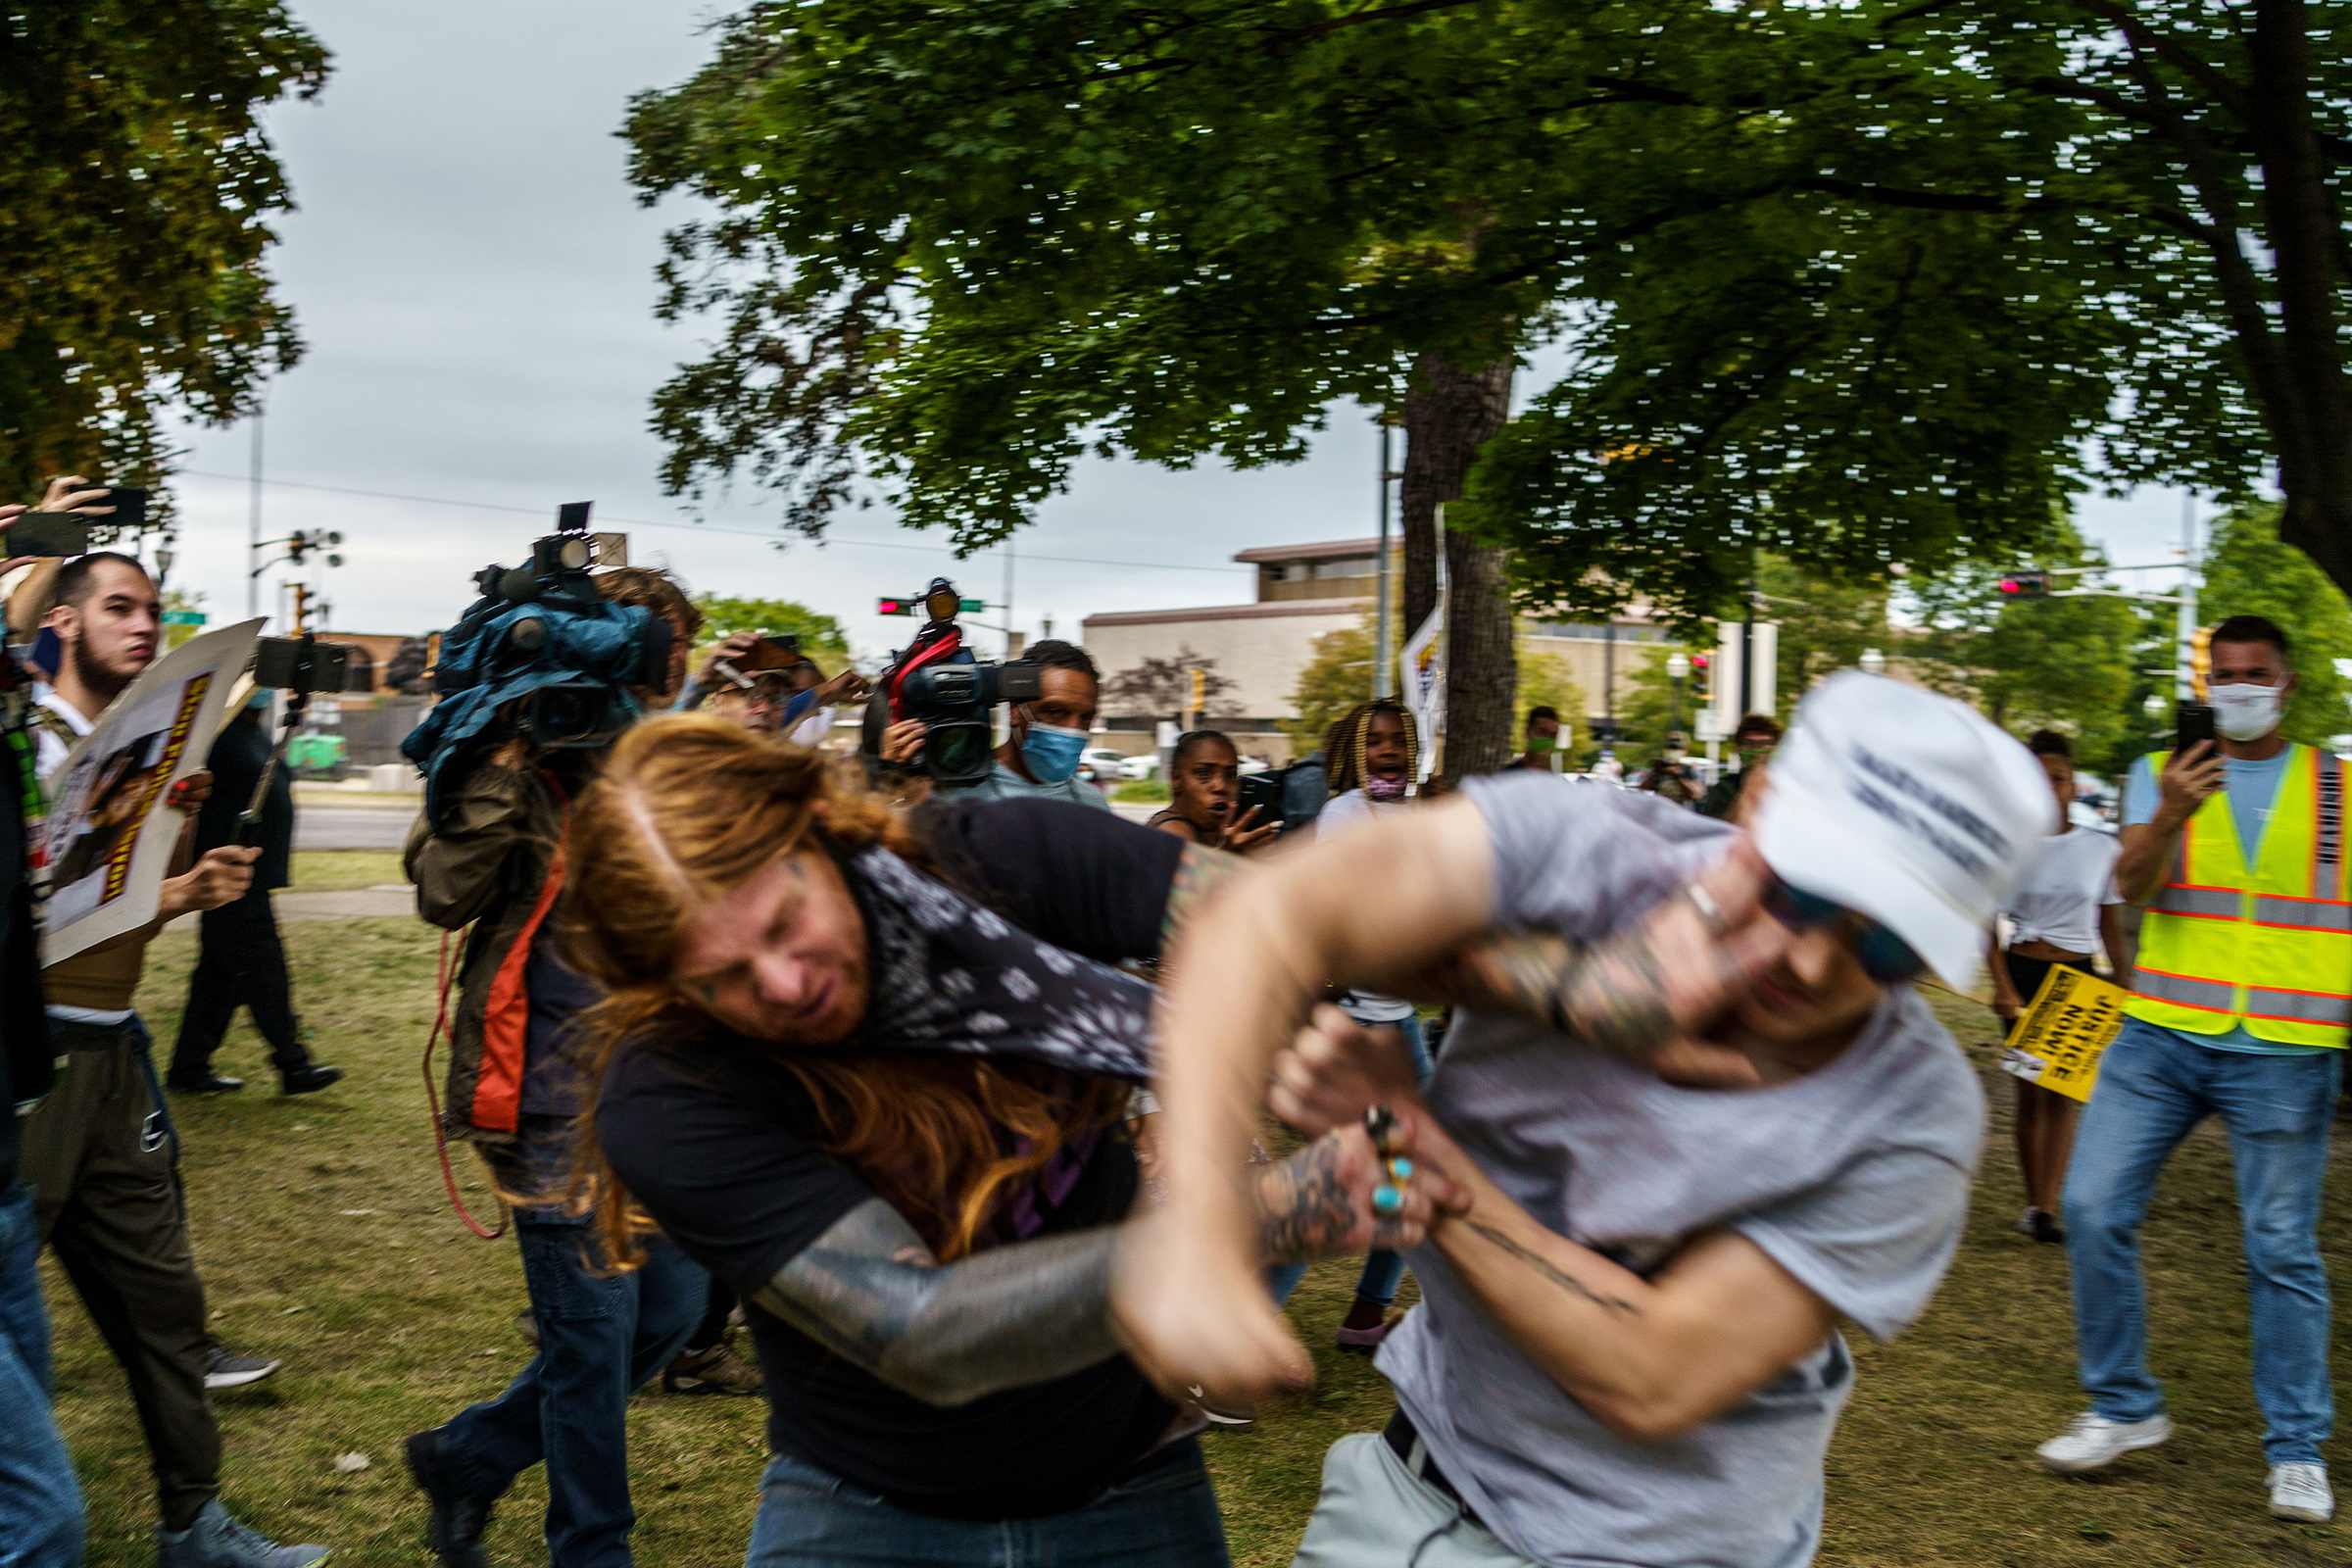 A protester scuffles with a Trump supporter (R) in Kenosha, Wis. on Sept. 1 amid ongoing demonstrations after the shooting by police of Jacob Blake